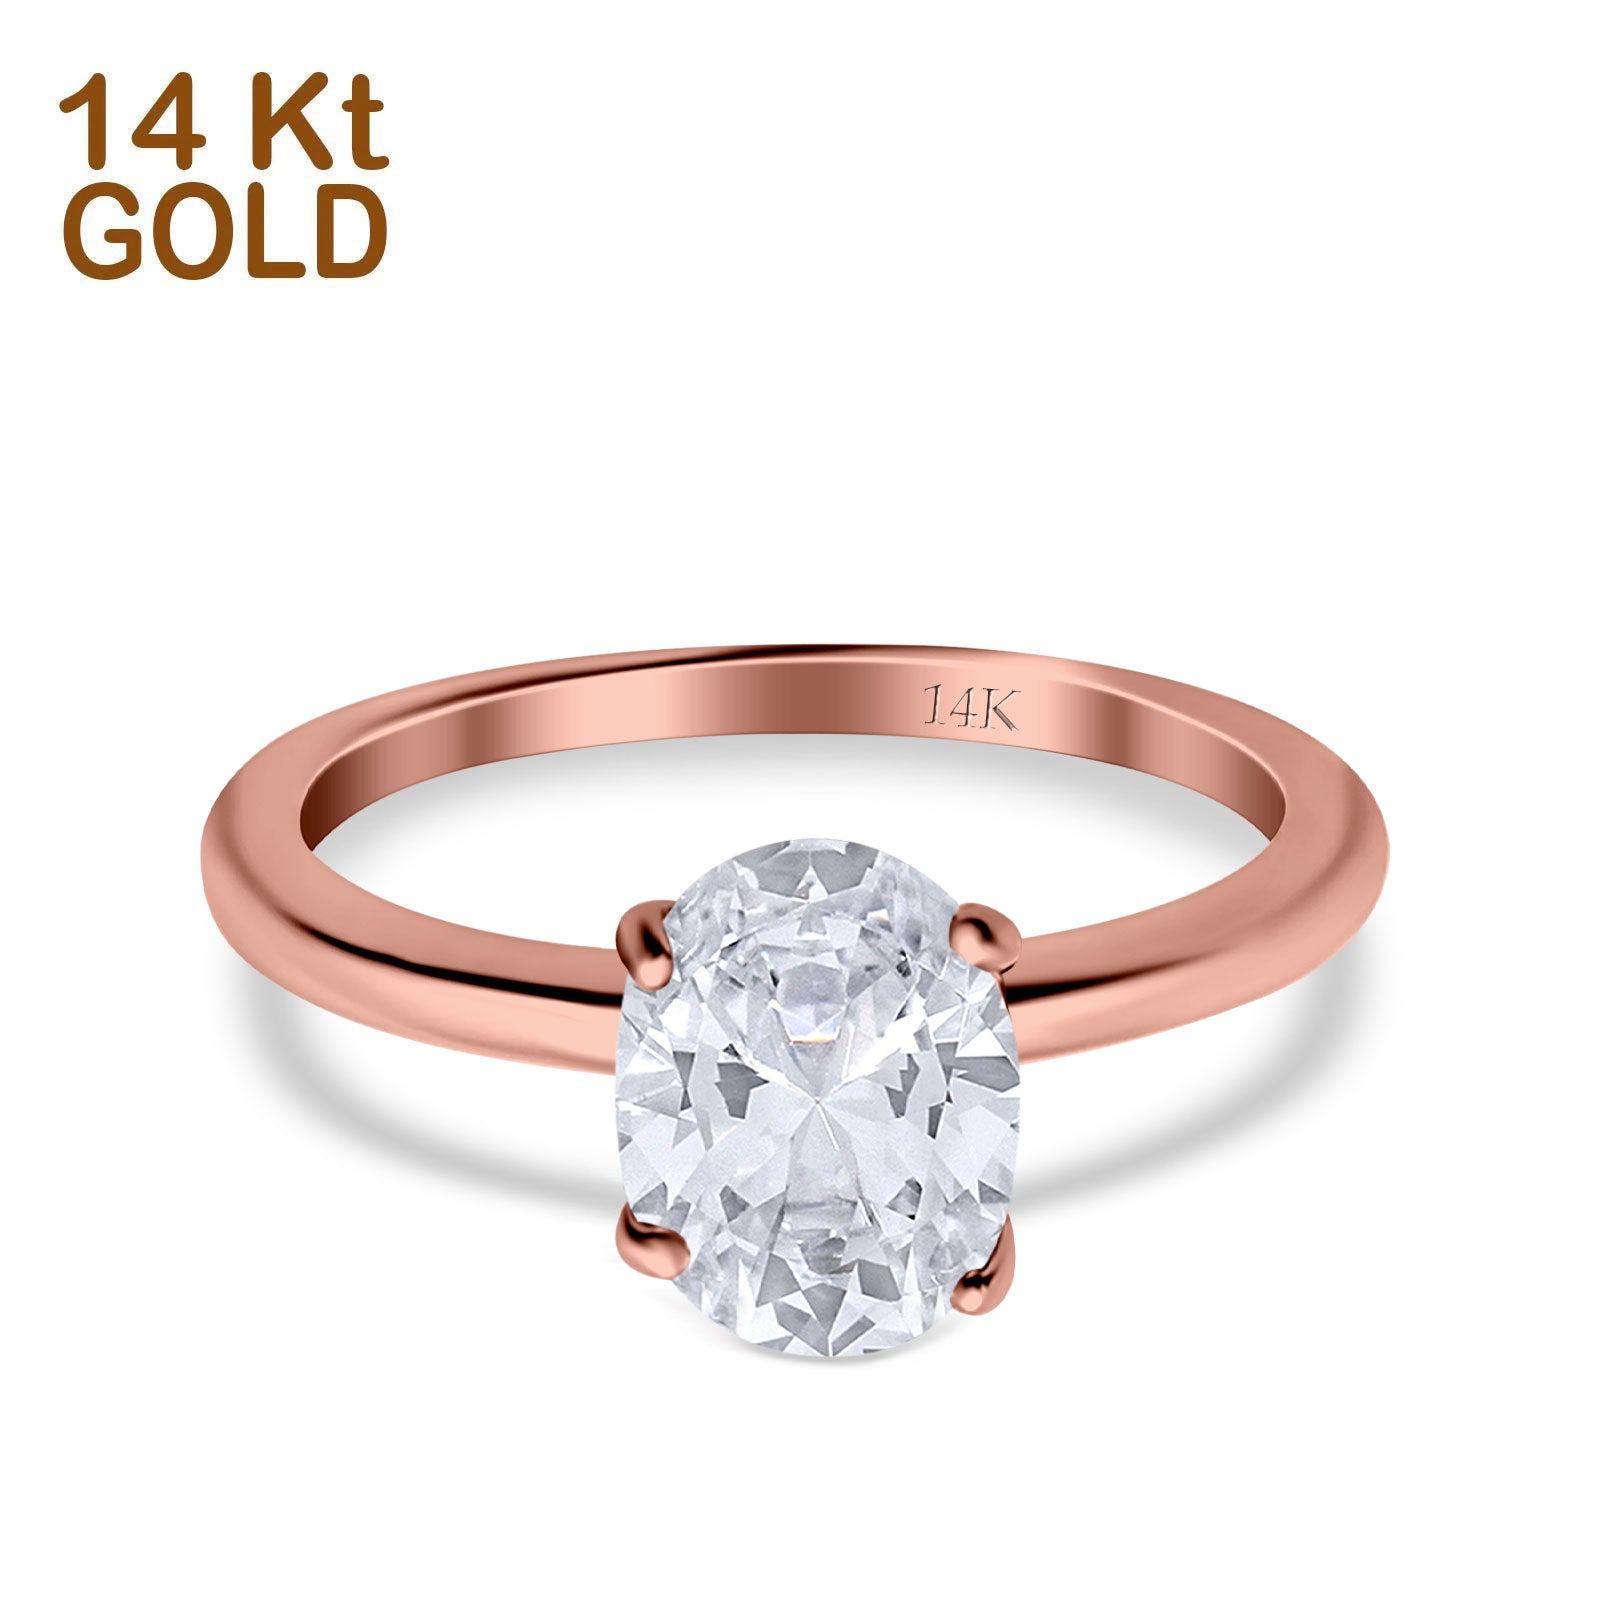 14K Gold Cathedral Oval Shape Bridal Simulated Cubic Zirconia Wedding Engagement Ring